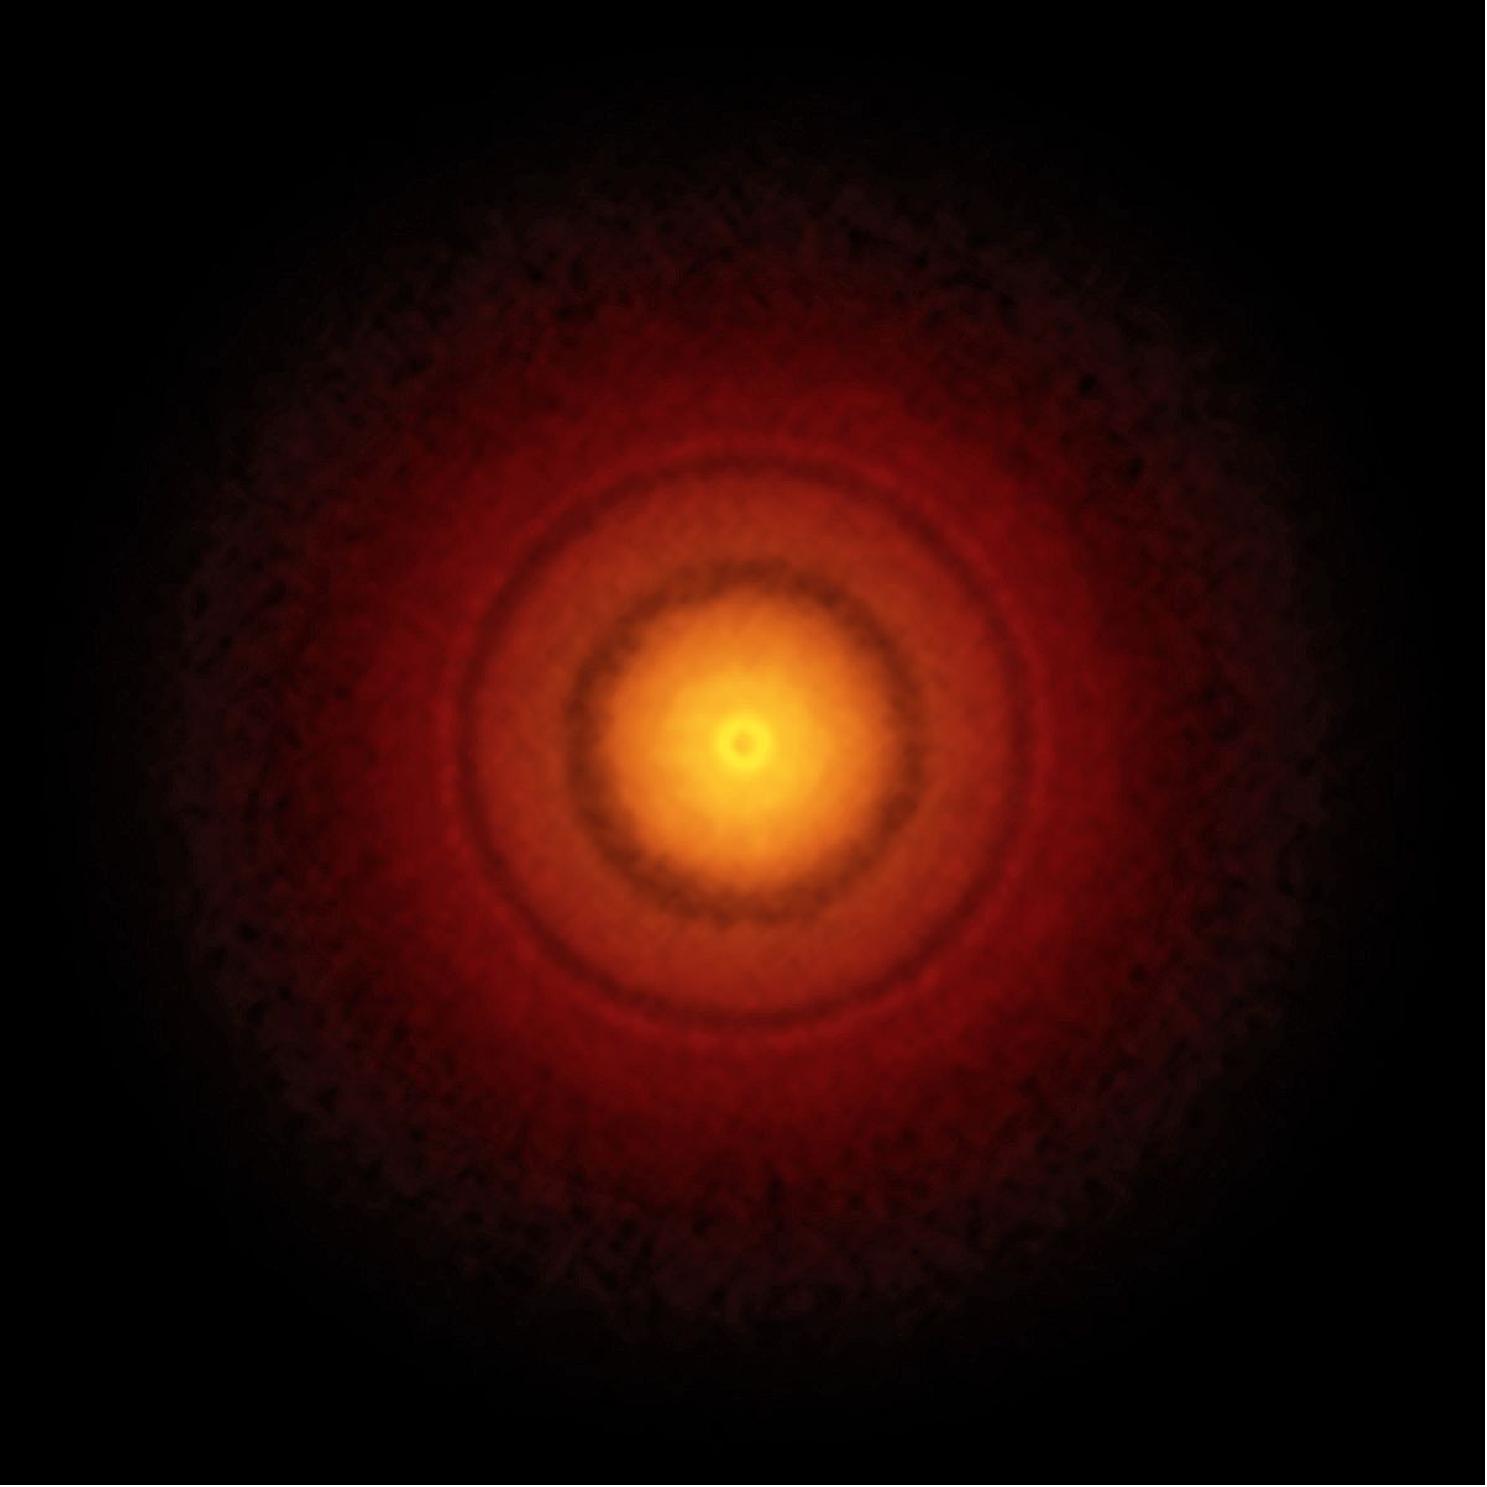 Figure 52: ALMA's best image of a protoplanetary disc to date. This picture of the nearby young star TW Hydrae reveals the classic rings and gaps that signify planets are in formation in this system [image credit: S. Andrews (Harvard-Smithsonian CfA); B. Saxton (NRAO/AUI/NSF); ALMA (ESO/NAOJ/NRAO)]